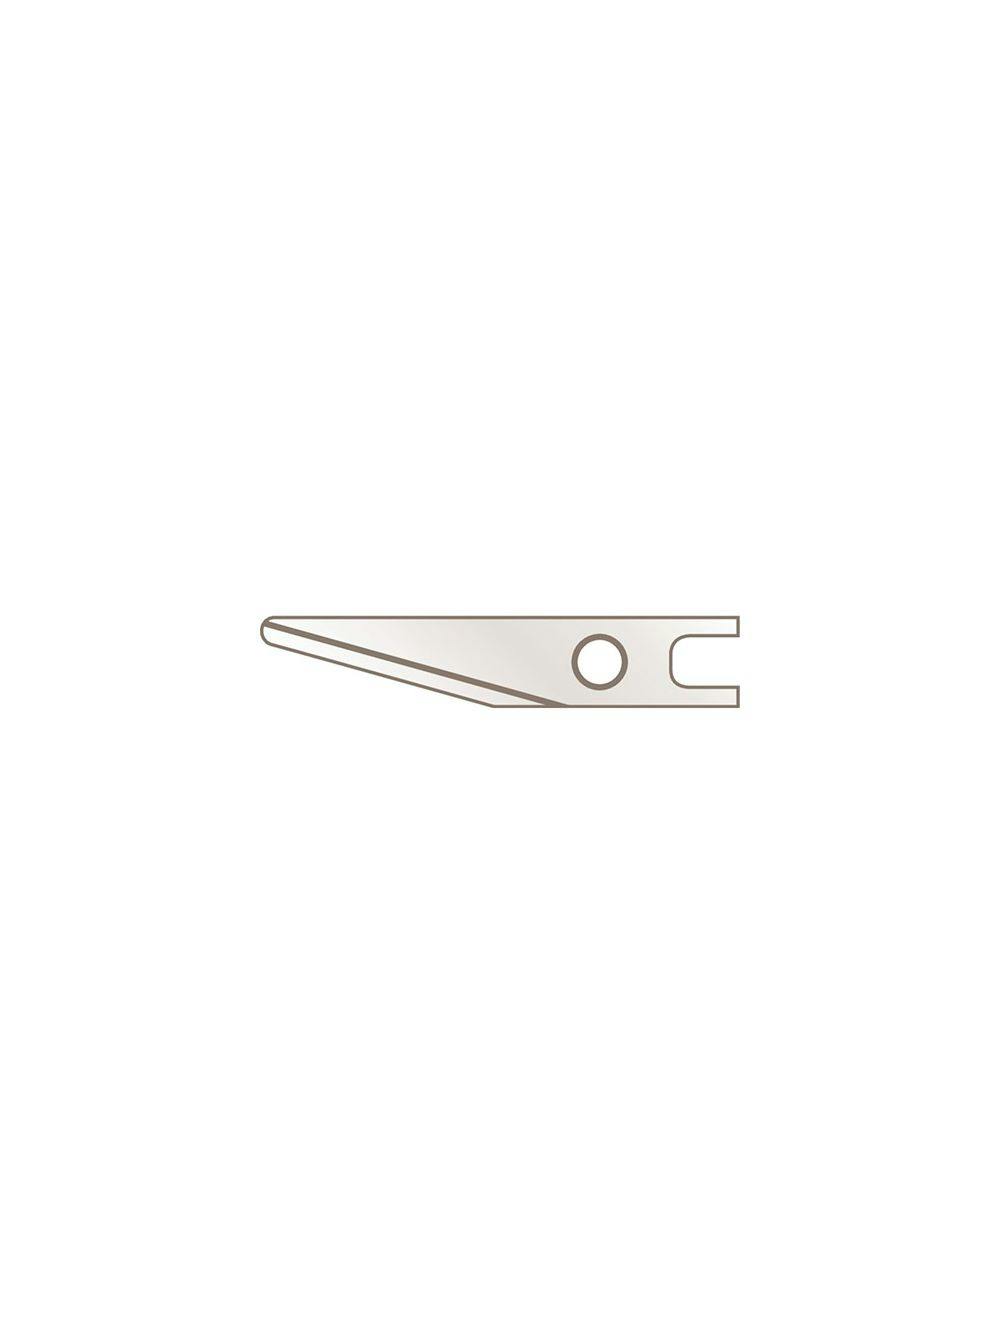 Martor Graphic Blade No. 8606, Dull Tip, Edges TiN Coated (Box Of 100)